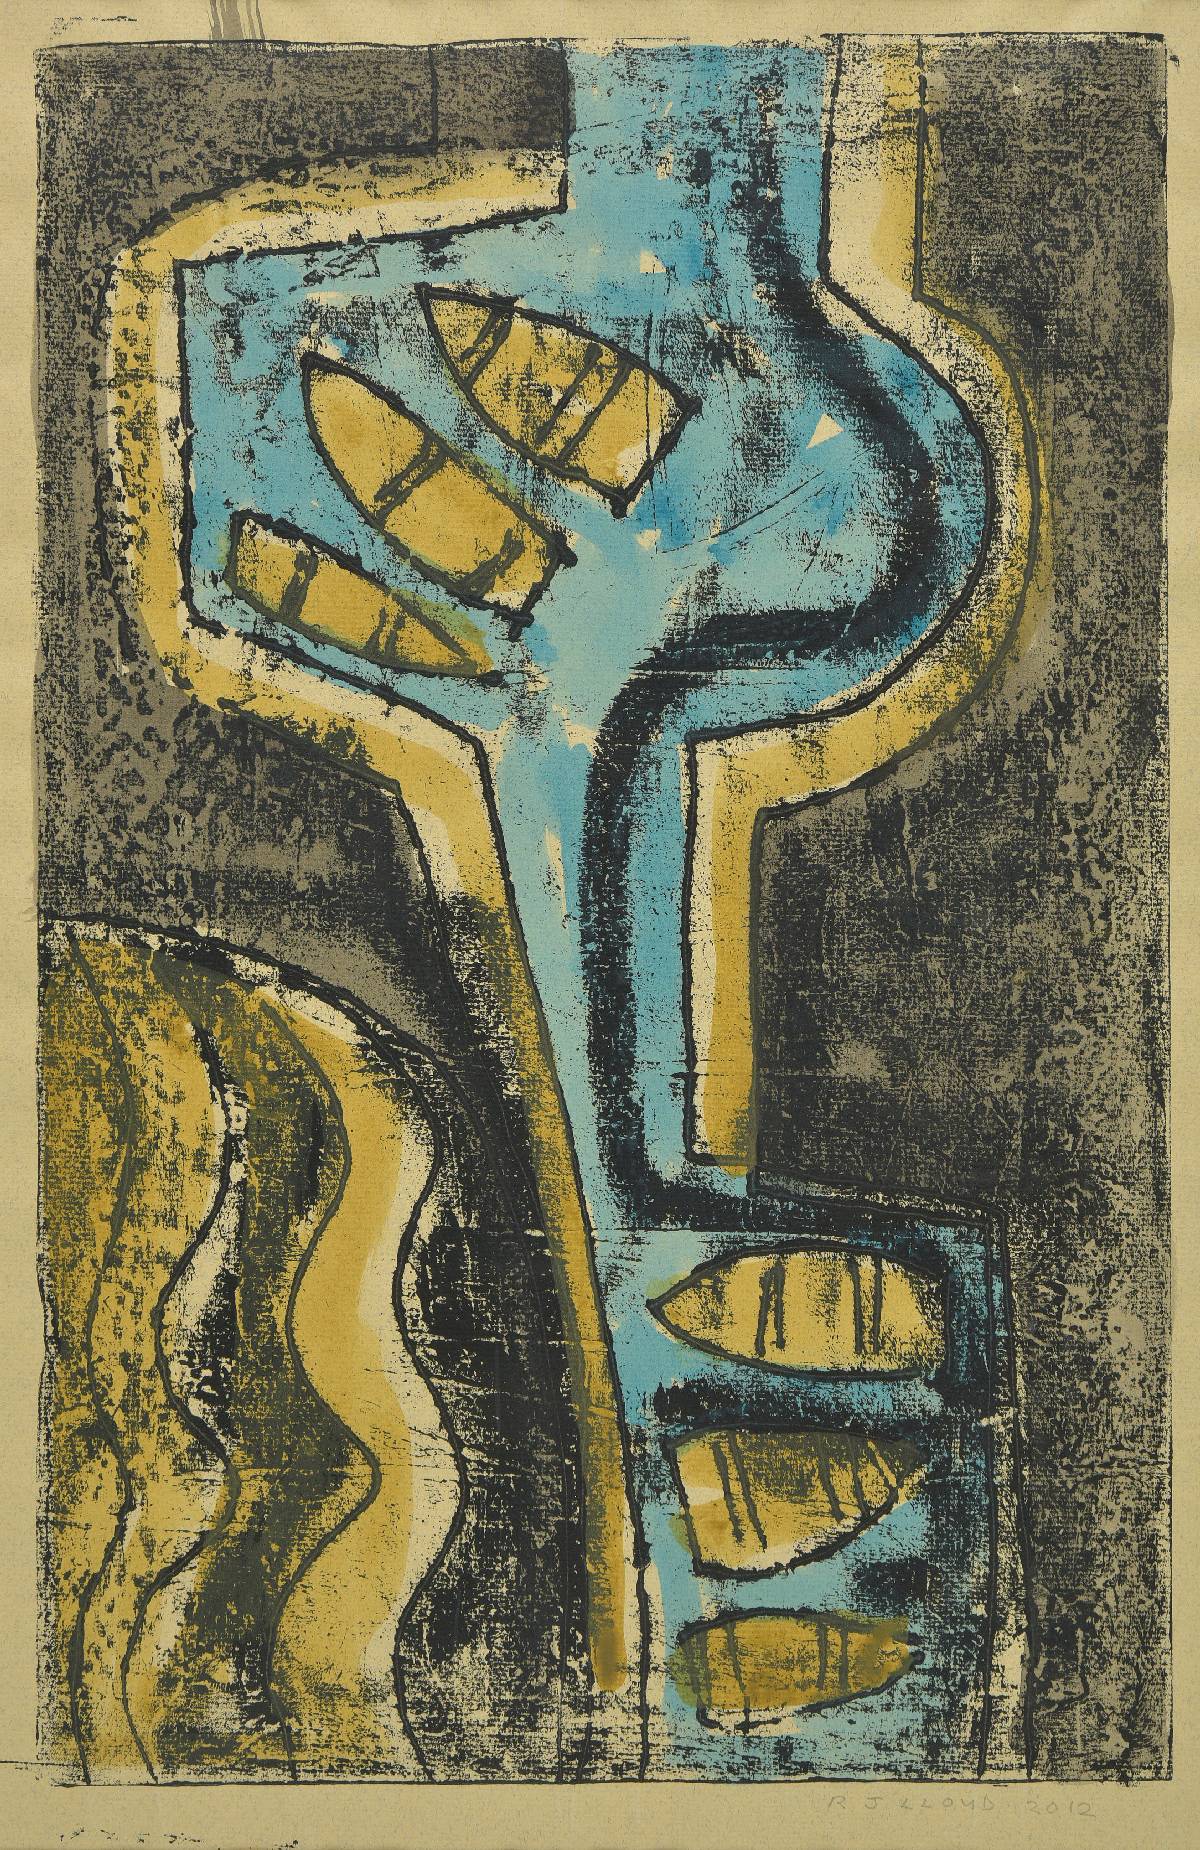 *Lloyd (Reginald J., 1926- ). Rain, 1953, monotype on paper, signed and dated lower left, 25 x 18.